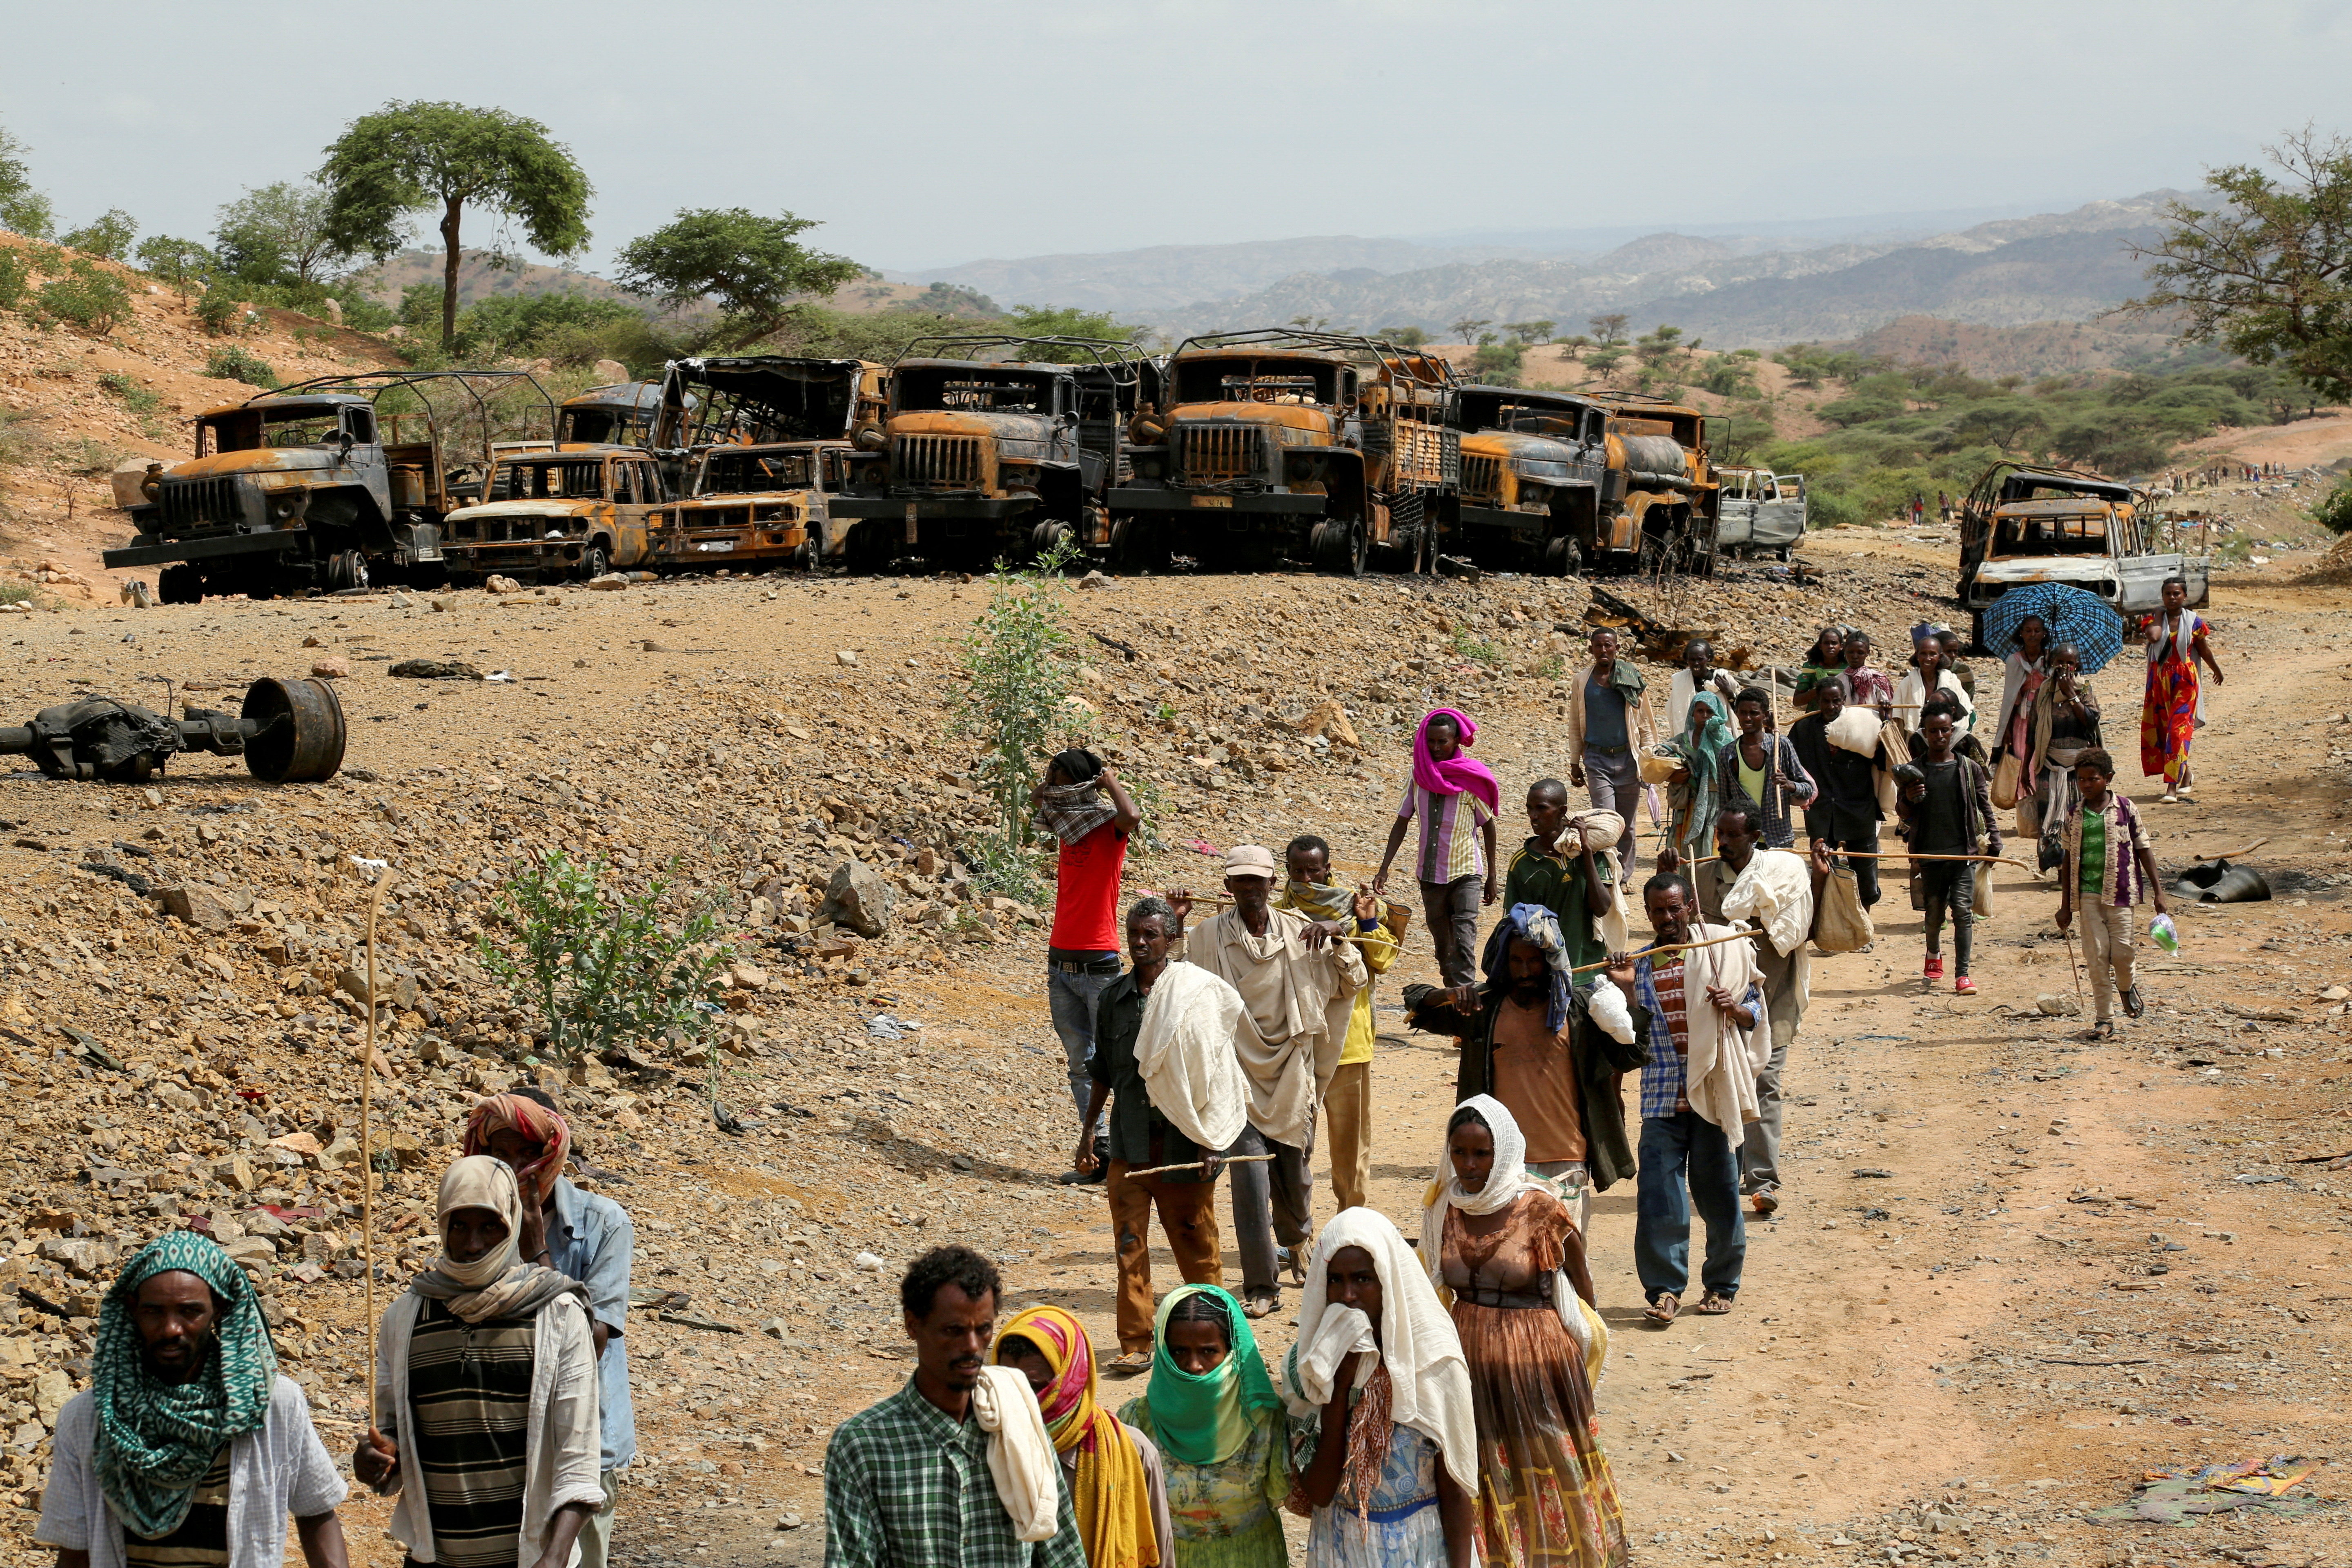 Villagers return from a market to Yechila town in south central Tigray walking past scores of burned vehicles, in Tigray, Ethiopia, July 10, 2021. REUTERS/Giulia Paravicini/File Photo/File Photo